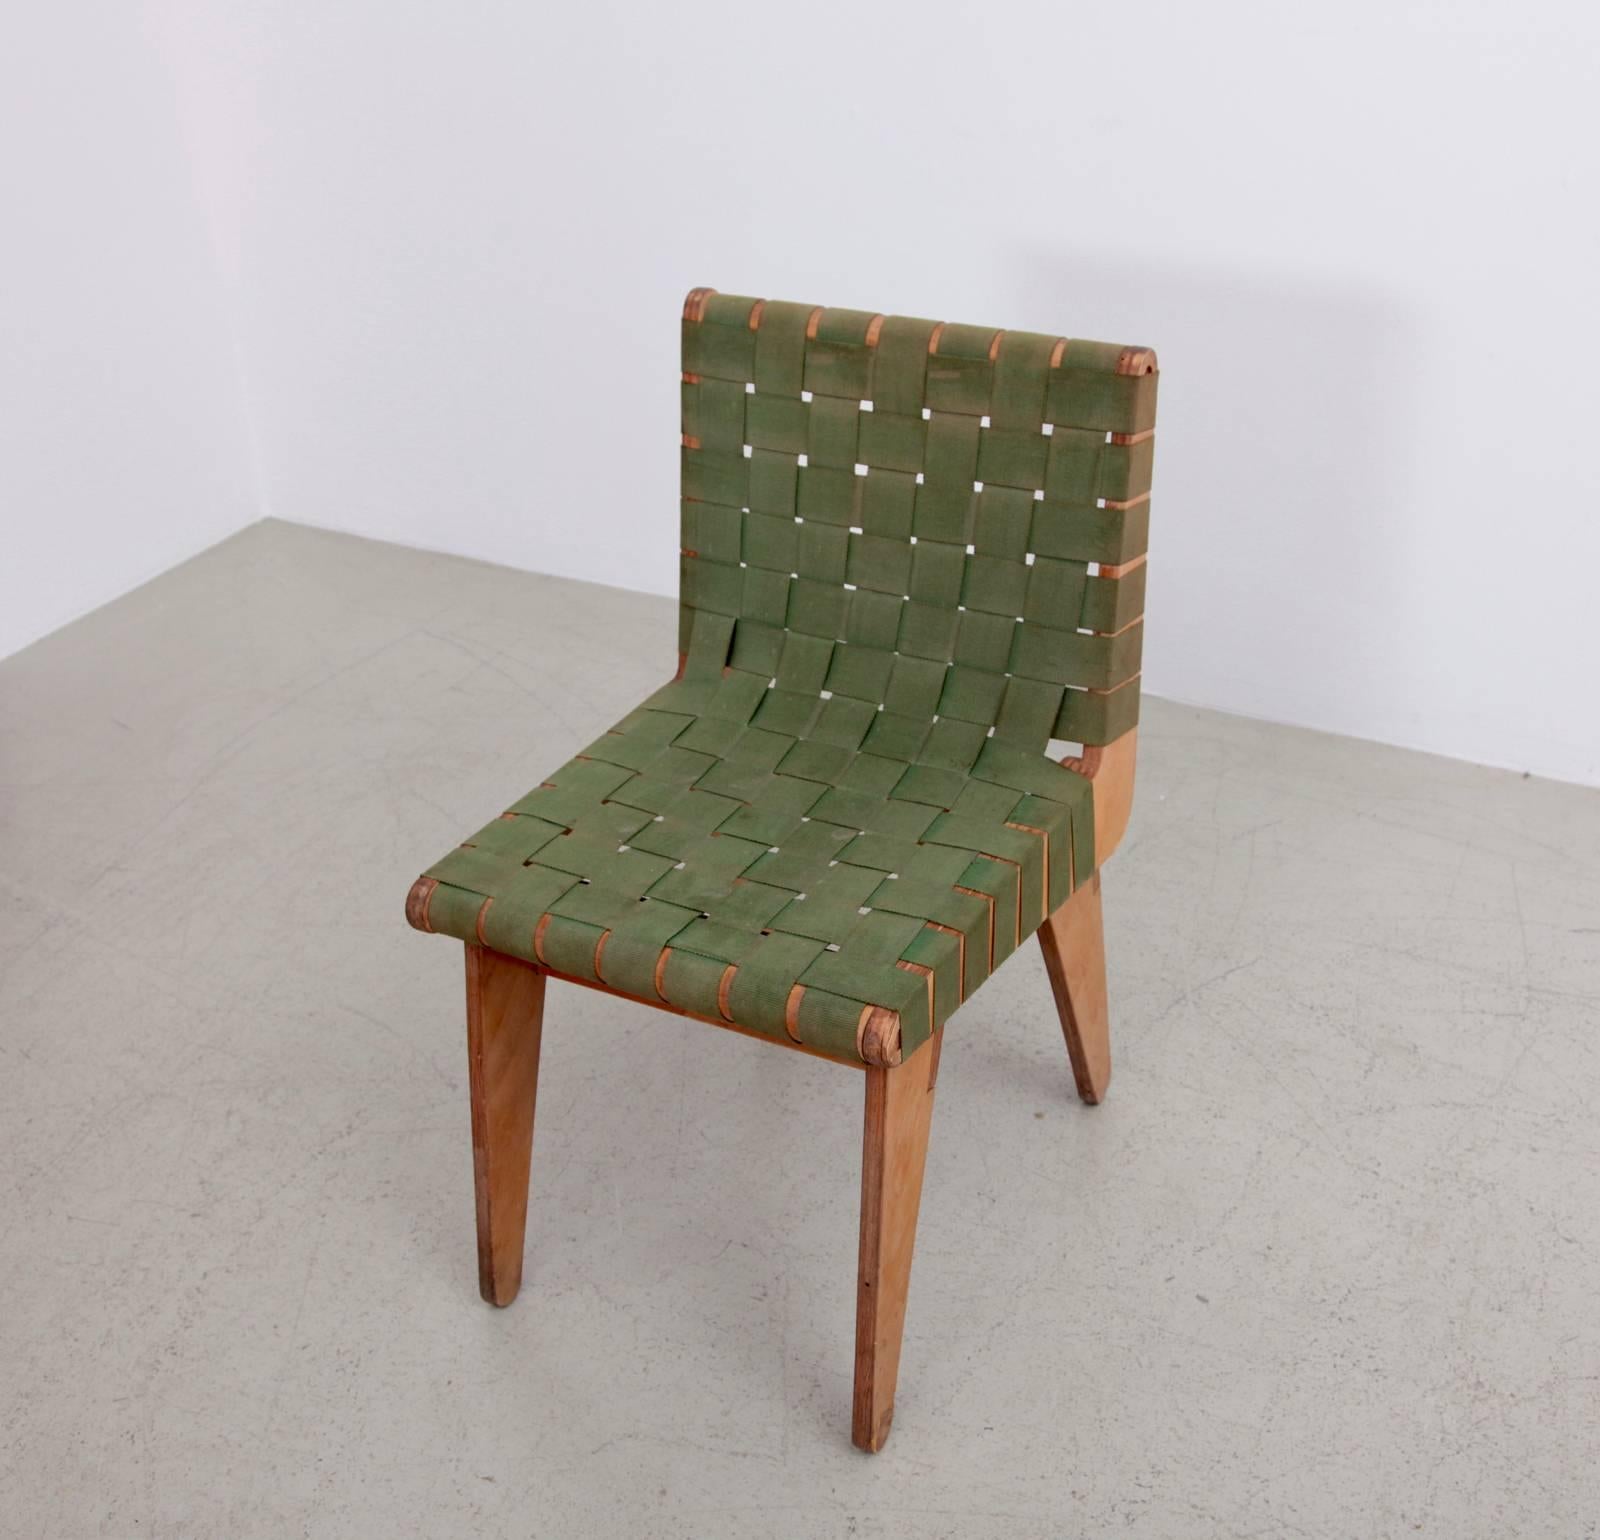 Hand built chair with green army surplus strapping and pitch pine frame, 1949. Klaus Grabe was a German designer and architect who emigrated to the United States with fellow Bauhaus members in 1933. Influenced by Breuer's works in plywood, Grabbe's